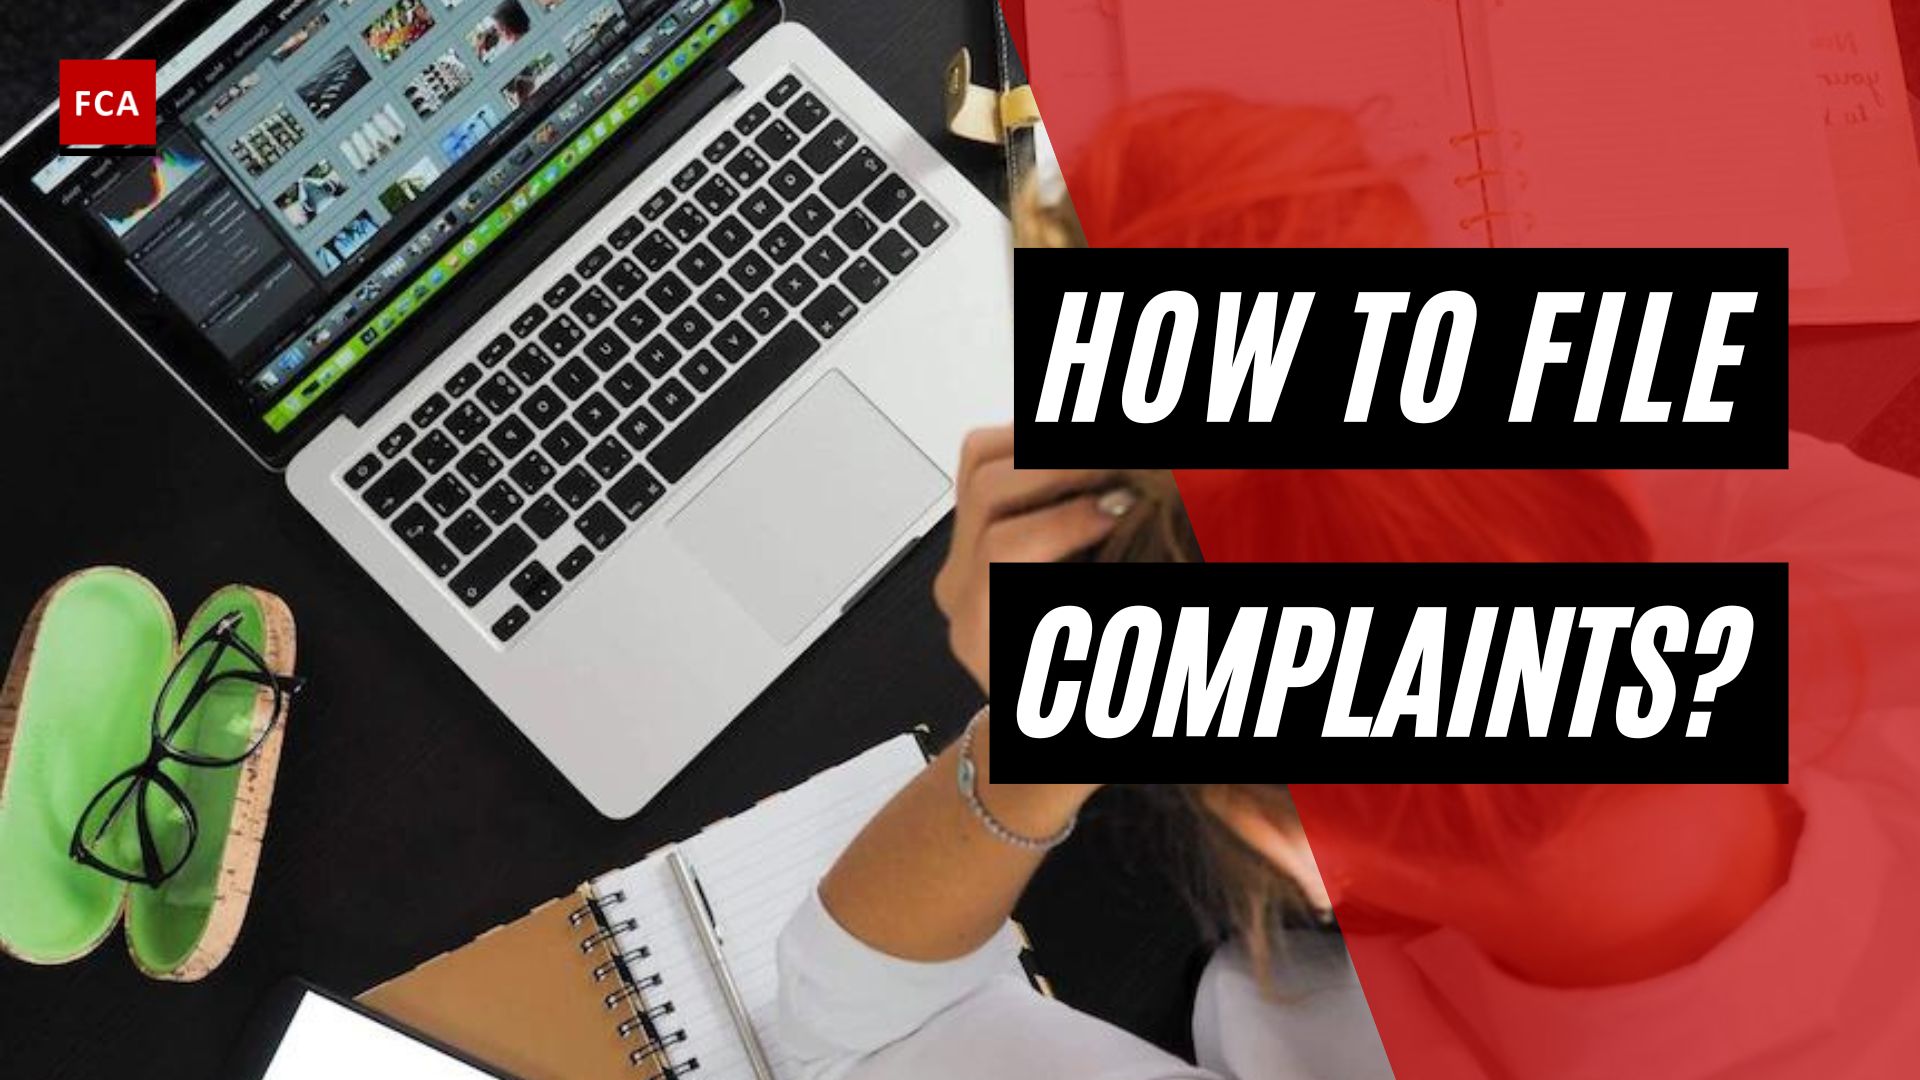 How To File Complaints?